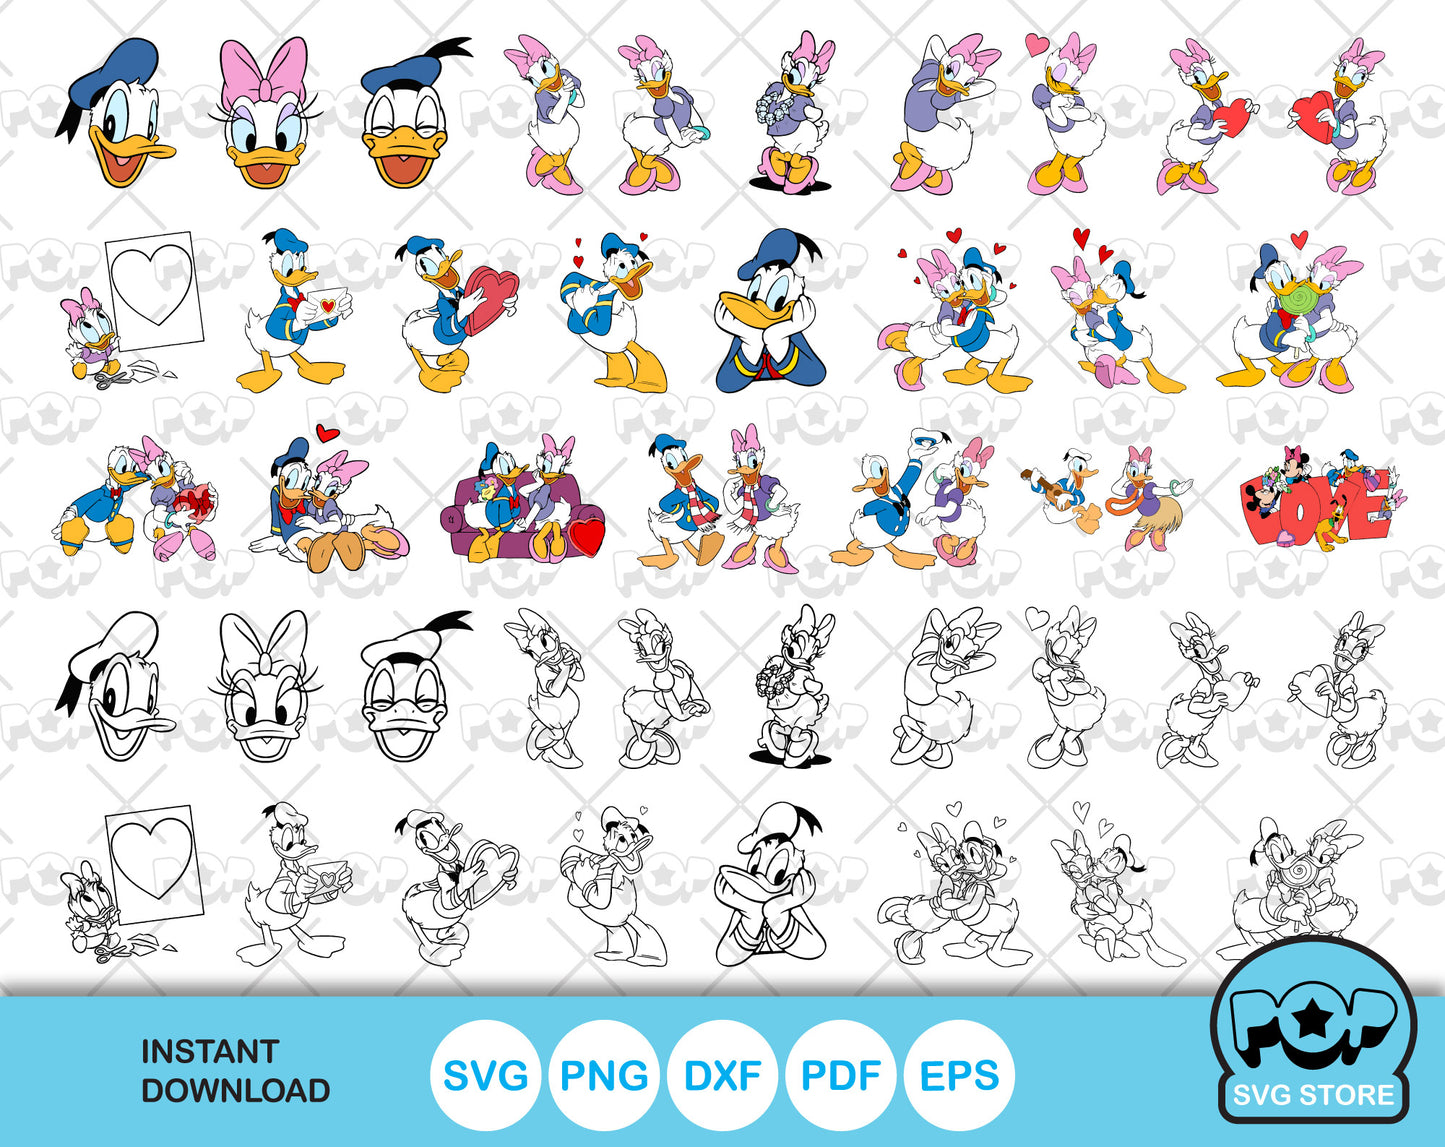 Donald and Daisy Duck Valentine's Day clipart bundle, Valentines Day SVG cut files for Cricut / Silhouette, PNG, DXF, instant download